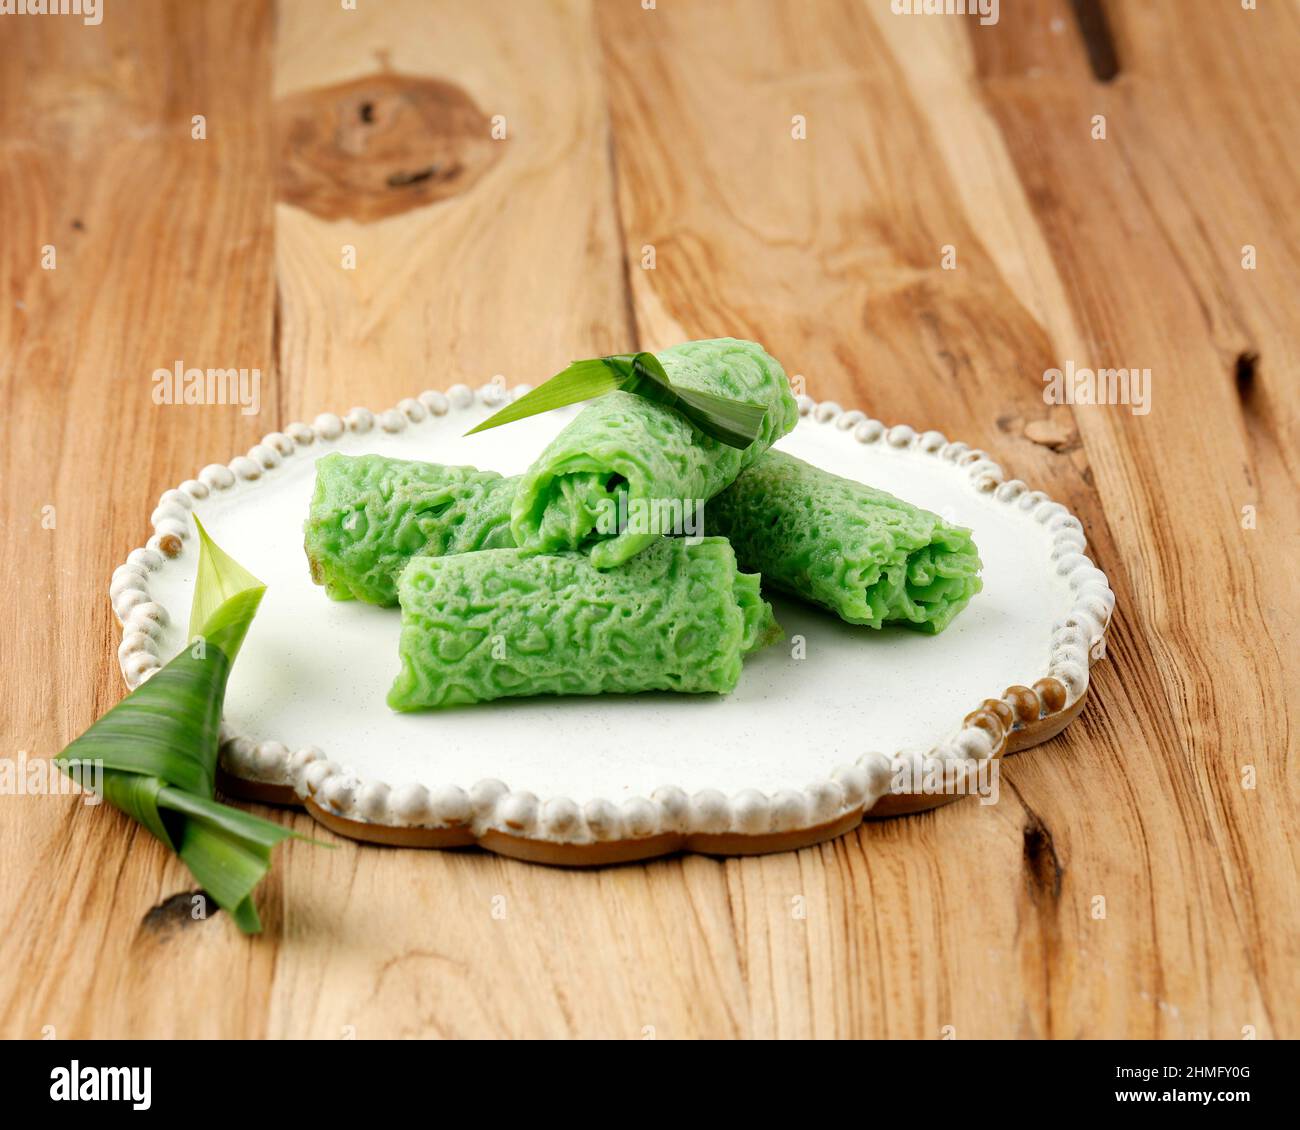 Dadar Gulung or Sweet Coconut Pancake, Indonesian Snack Dessert made from Flour with Sweetened Grated Coconut. Green Color from Pandan and Suji Leaves Stock Photo